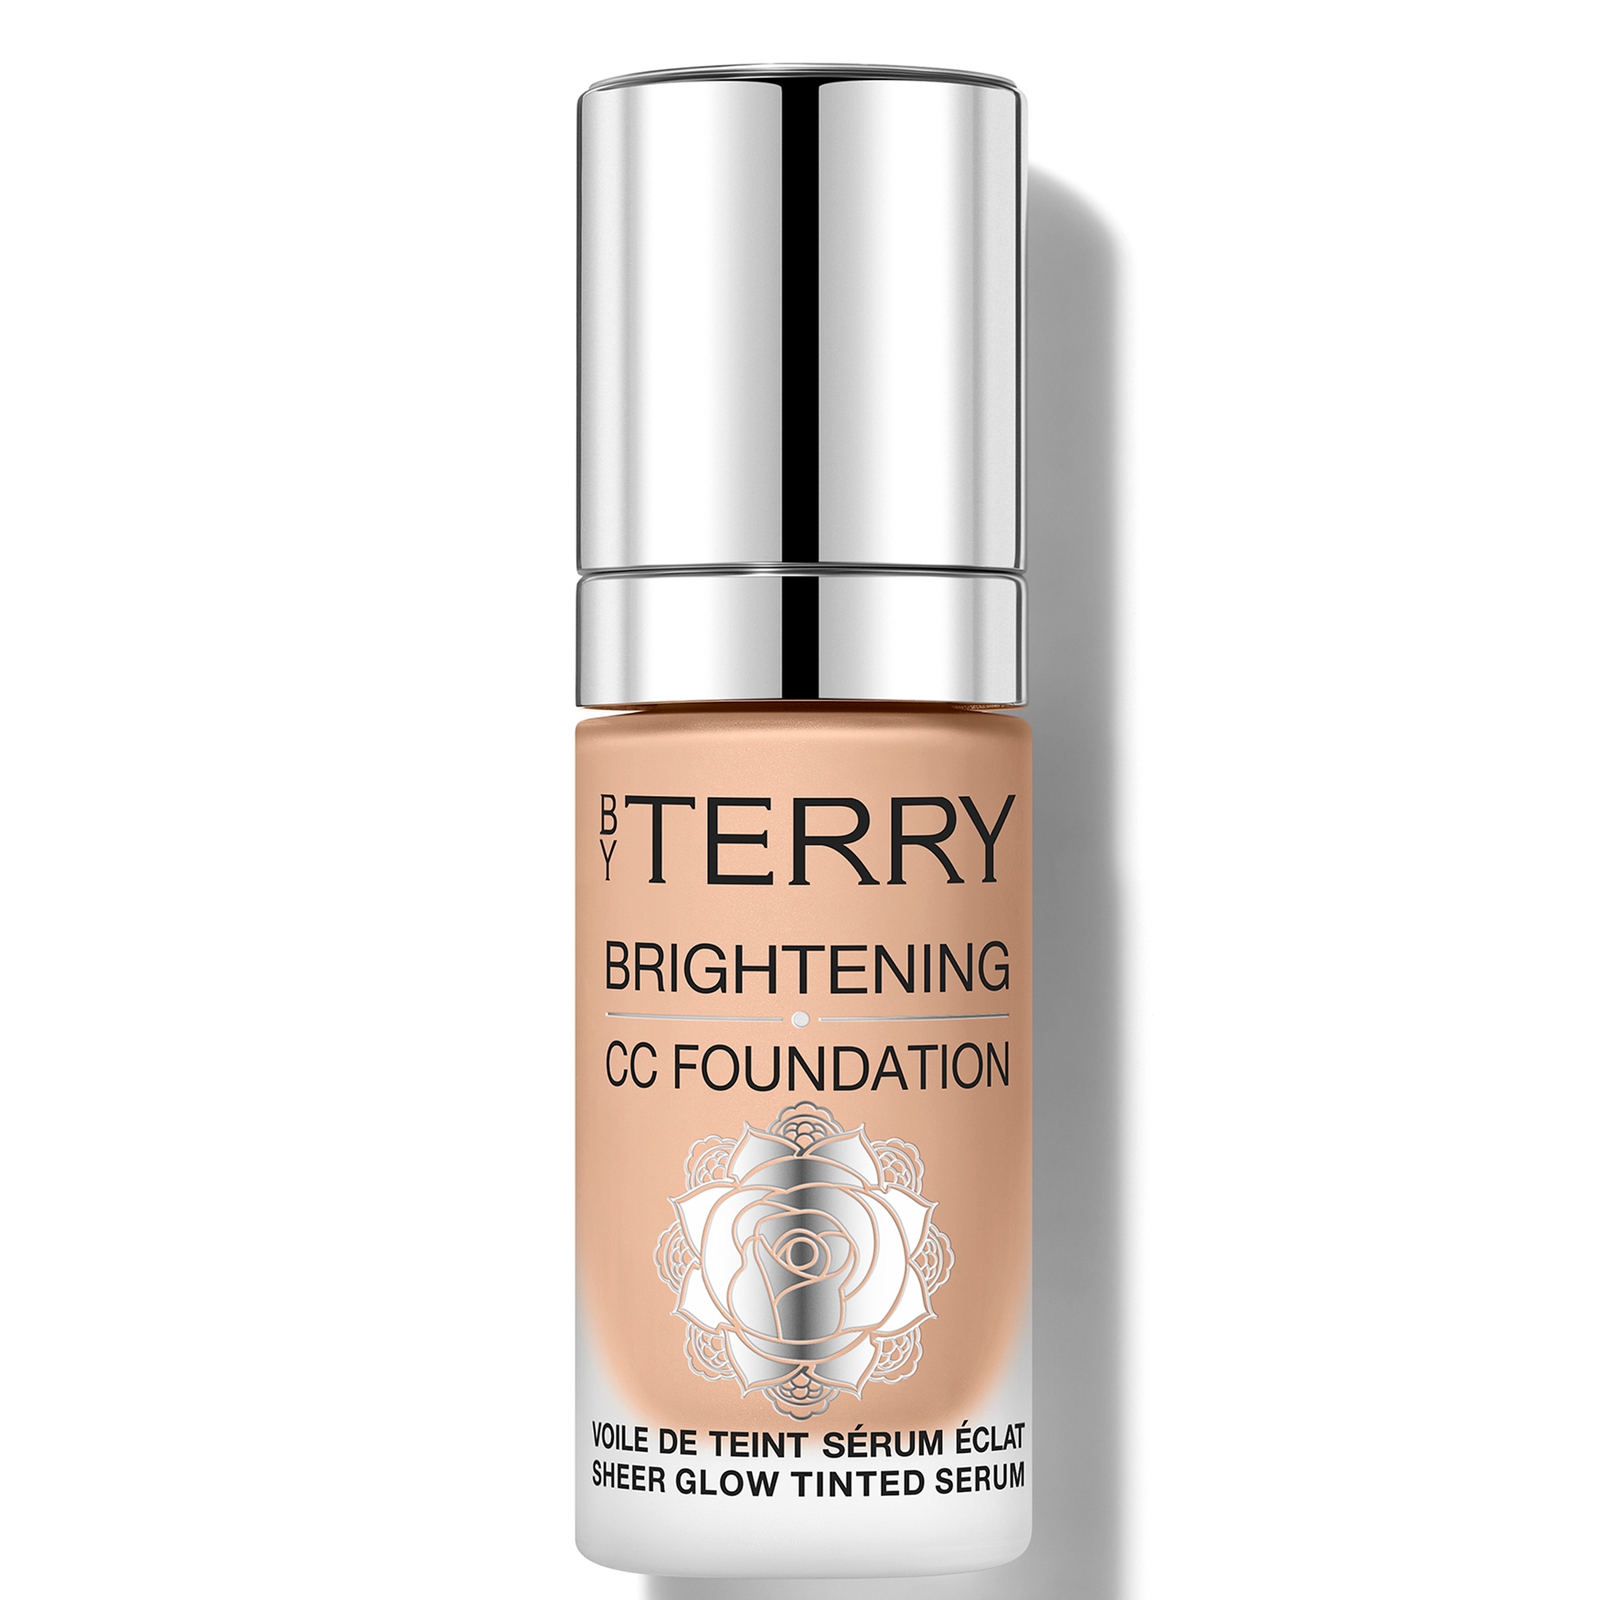 By Terry Brightening Cc Foundation 30ml (various Shades) - 4c In Neutral